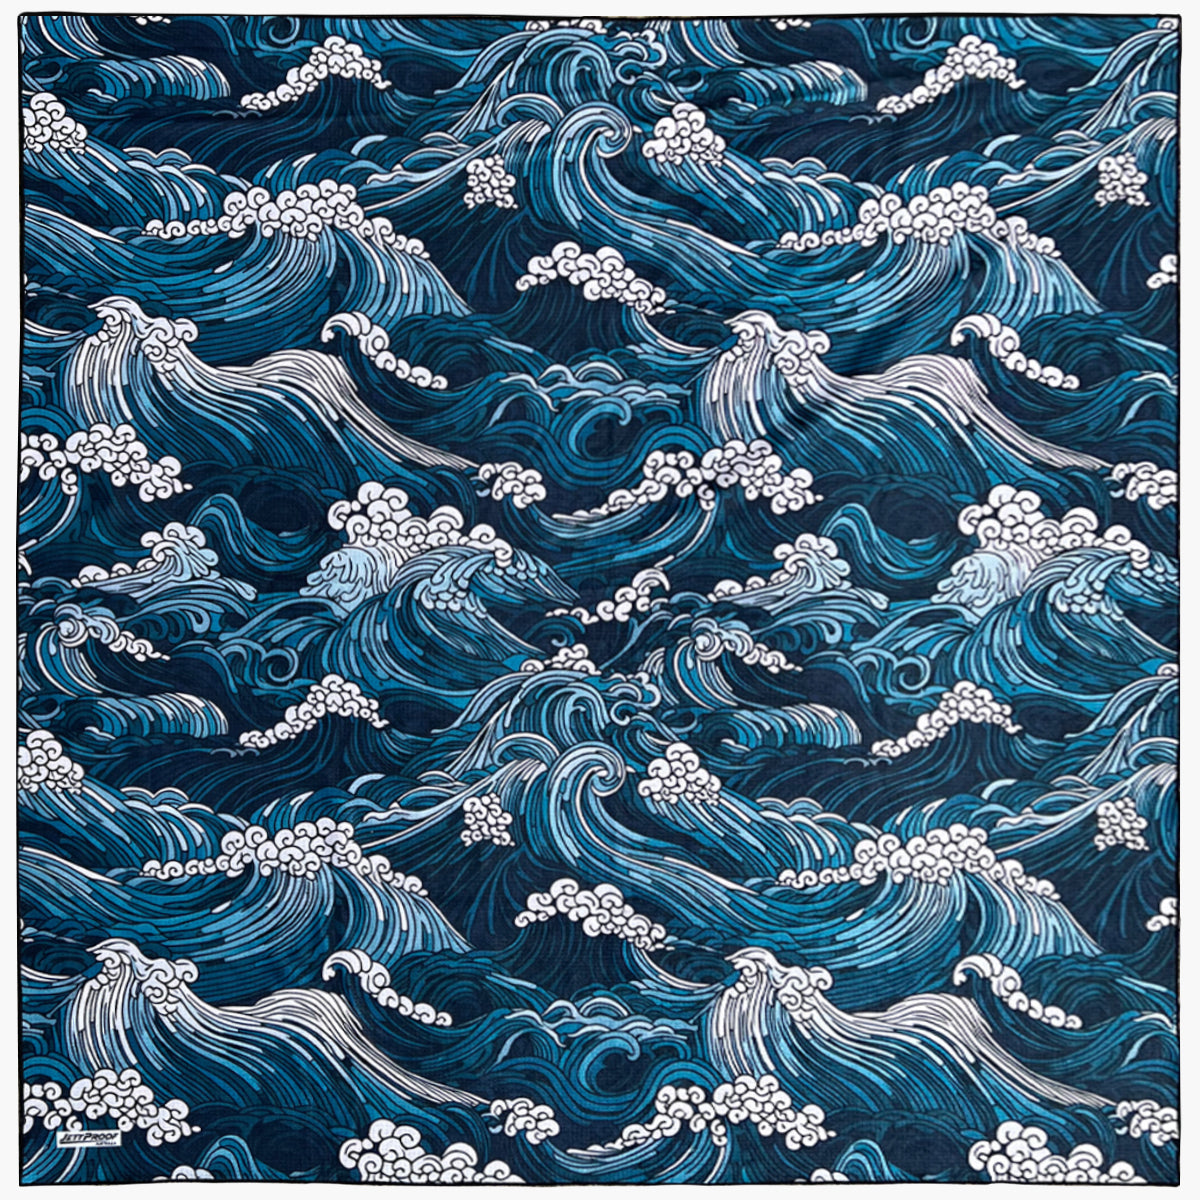 The Great Wave - Sand Free Beach Towel